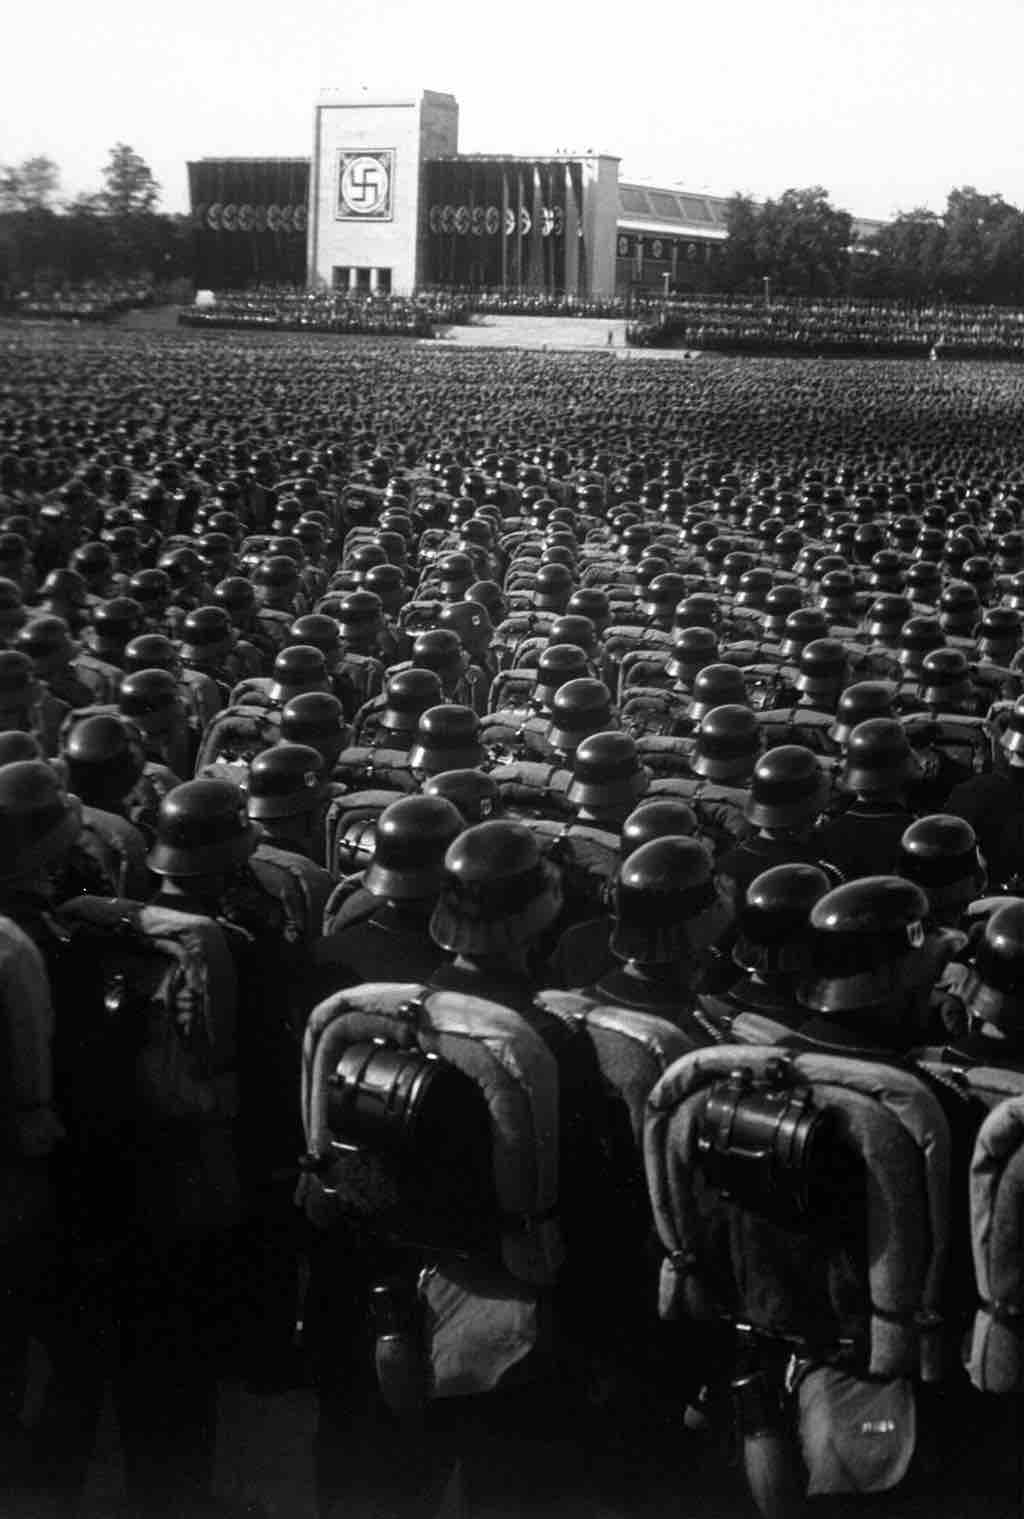 Overview of the mass roll call of SA, SS, and NSKK troops. Nuremberg, November 9, 1935. (National Archives Gift Collection)